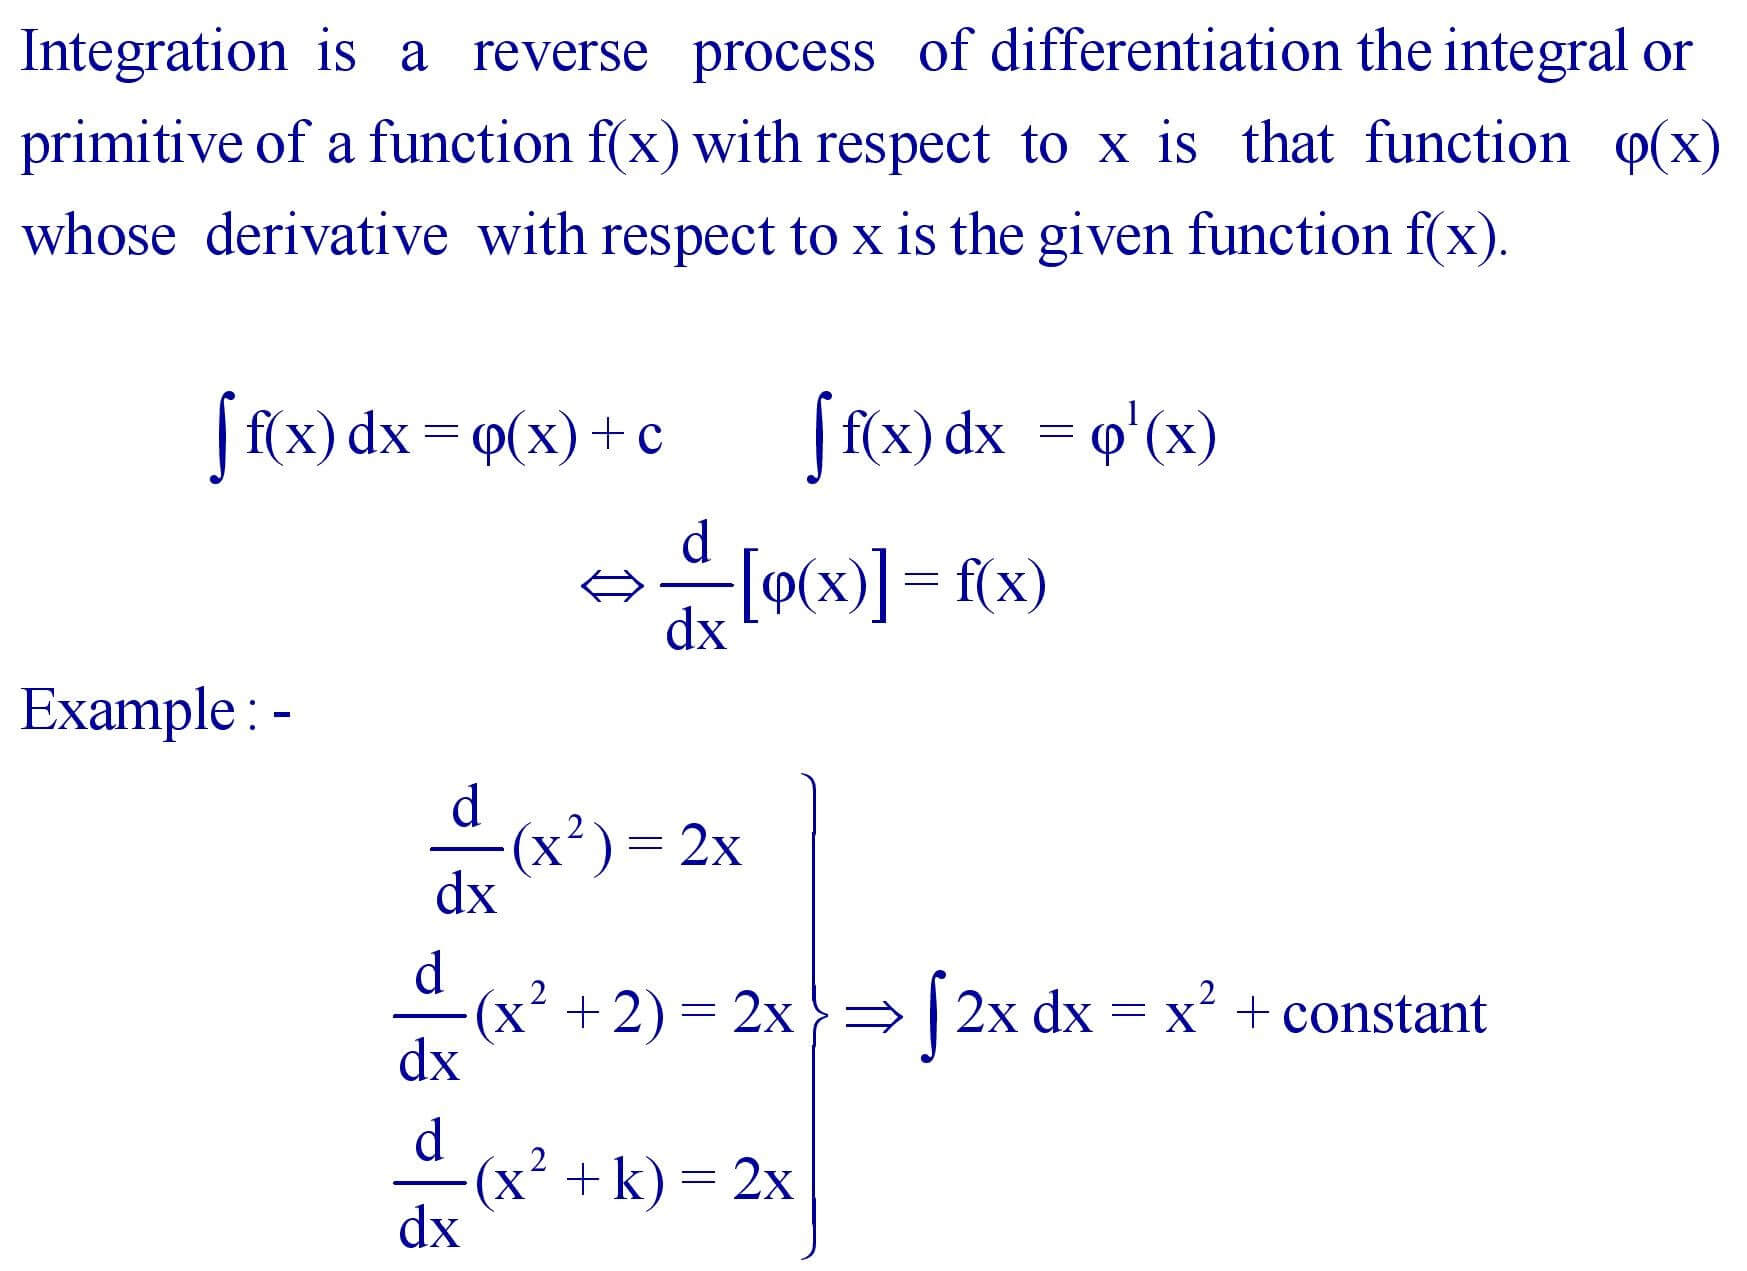 Integration of a function